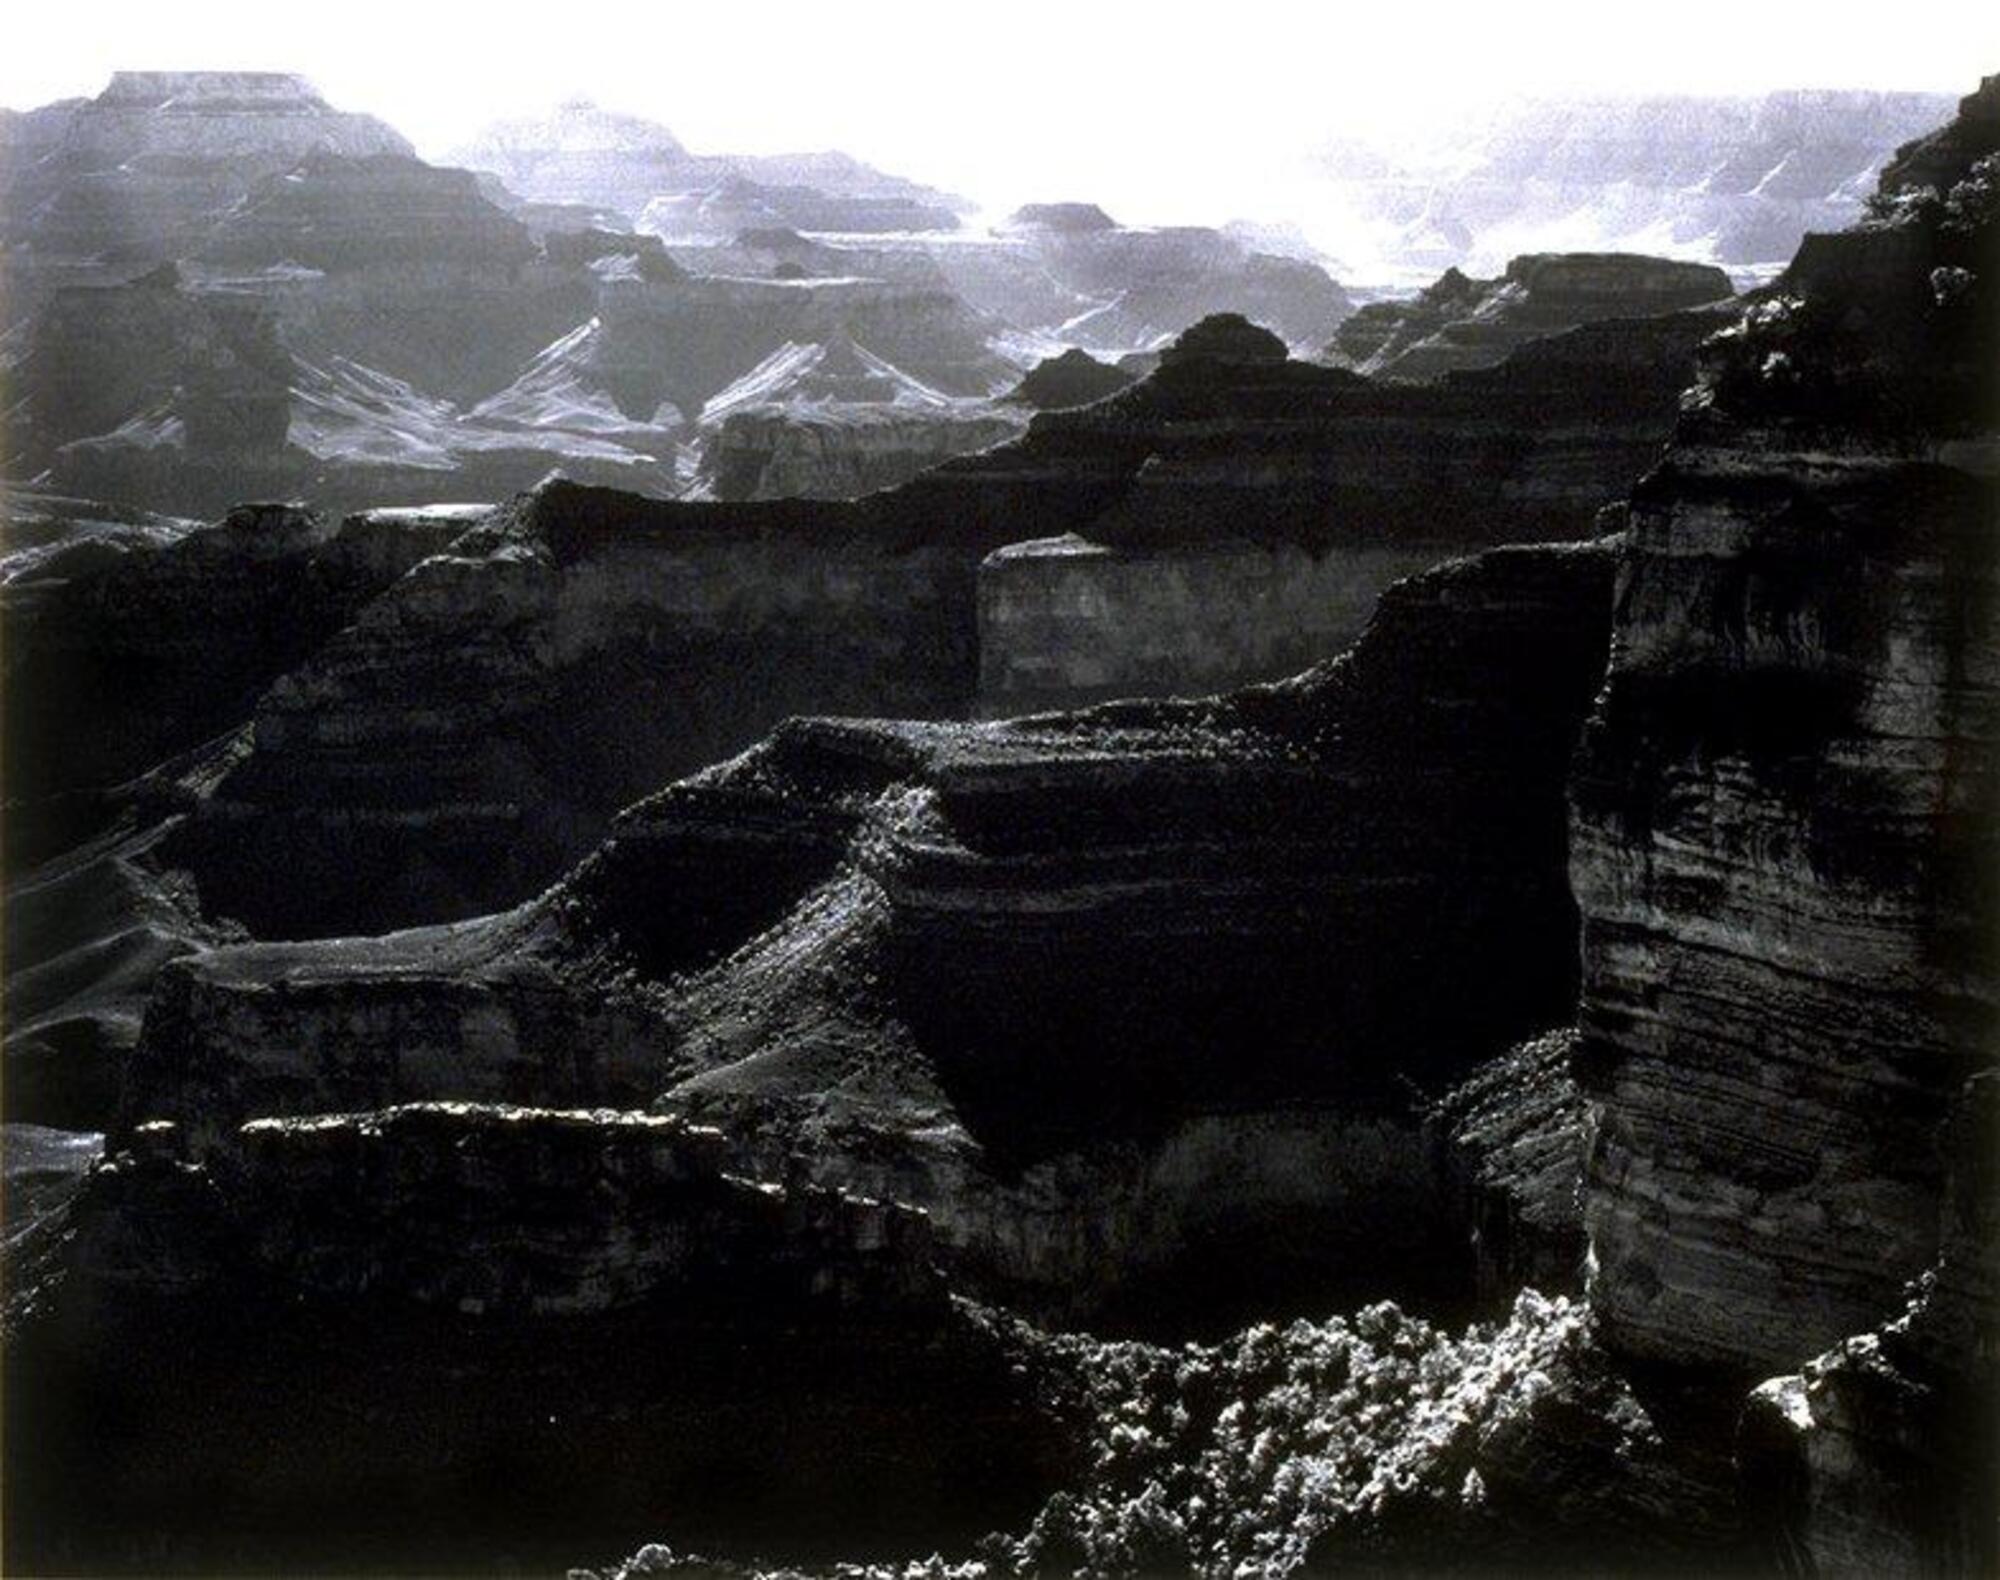 Taken from a high vantage point, this photograph depicts a view of a vast desert canyon. The ridges of the canyon extend into the distance.